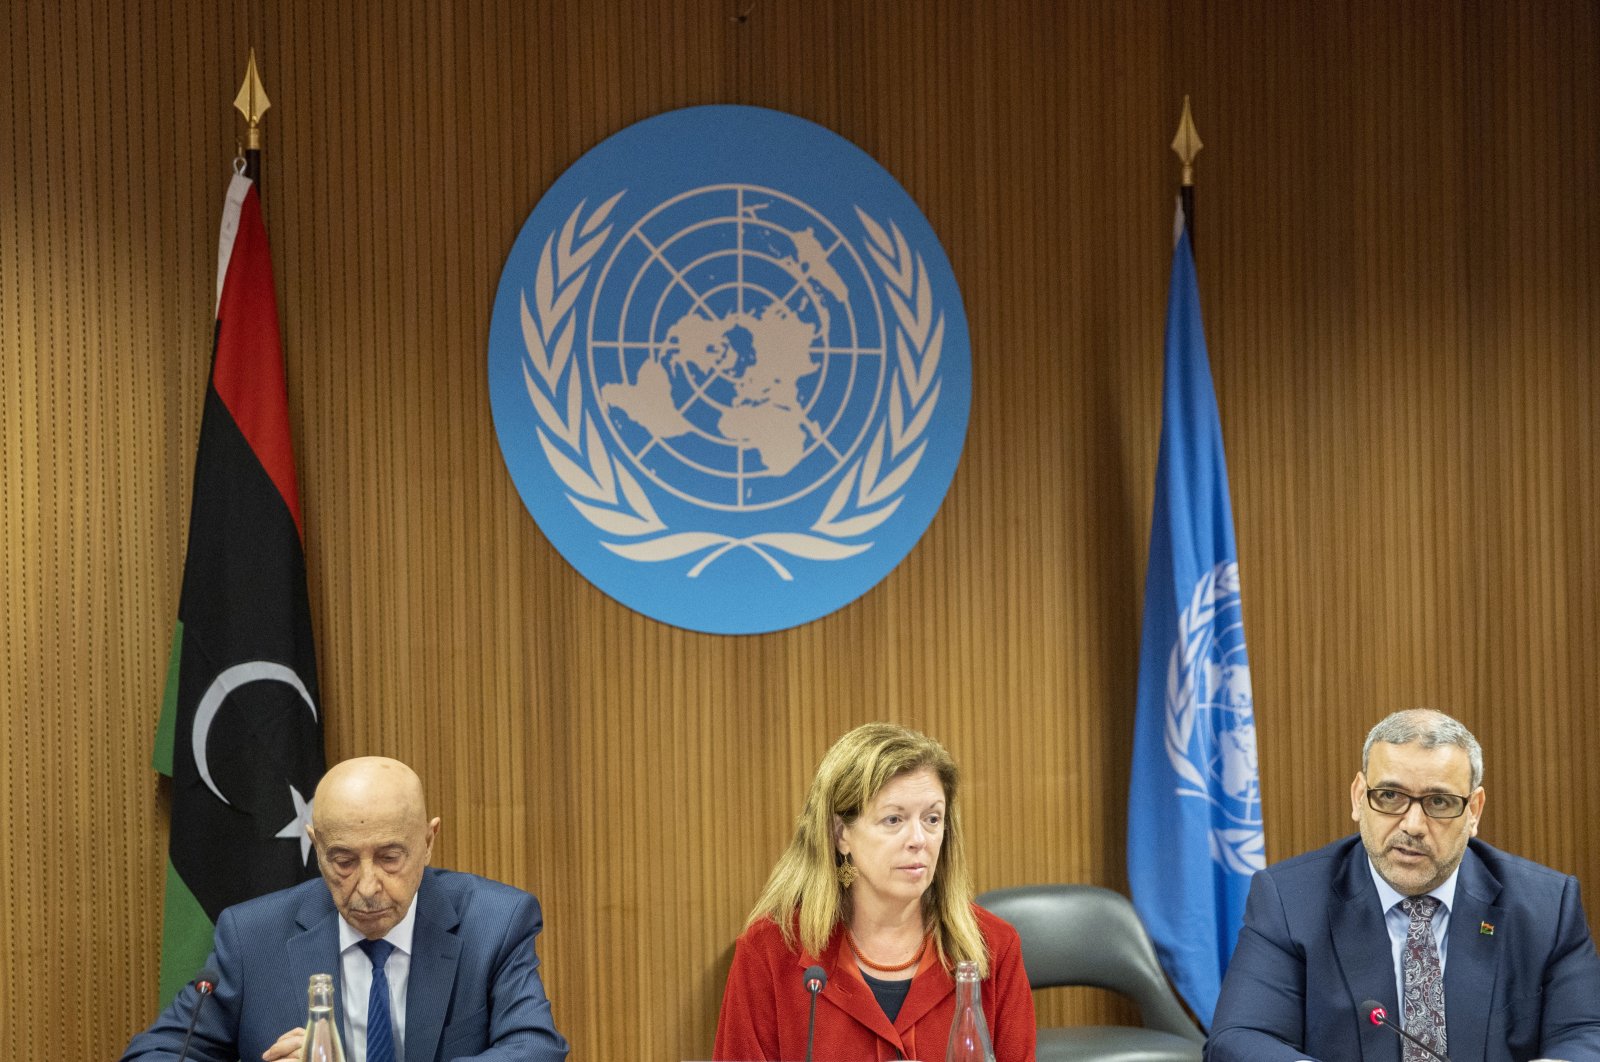 Speaker of the House of Representatives (HoR), Aguila Saleh, United Nations Special Adviser on Libya, Stephanie Williams and President of the High State Council of State (HSC), Khaled Al-Mishri, attend a High-level Meeting on Libya Constitutional Track at the United Nations in Geneva, Switzerland, June 28, 2022. (REUTERS Photo)